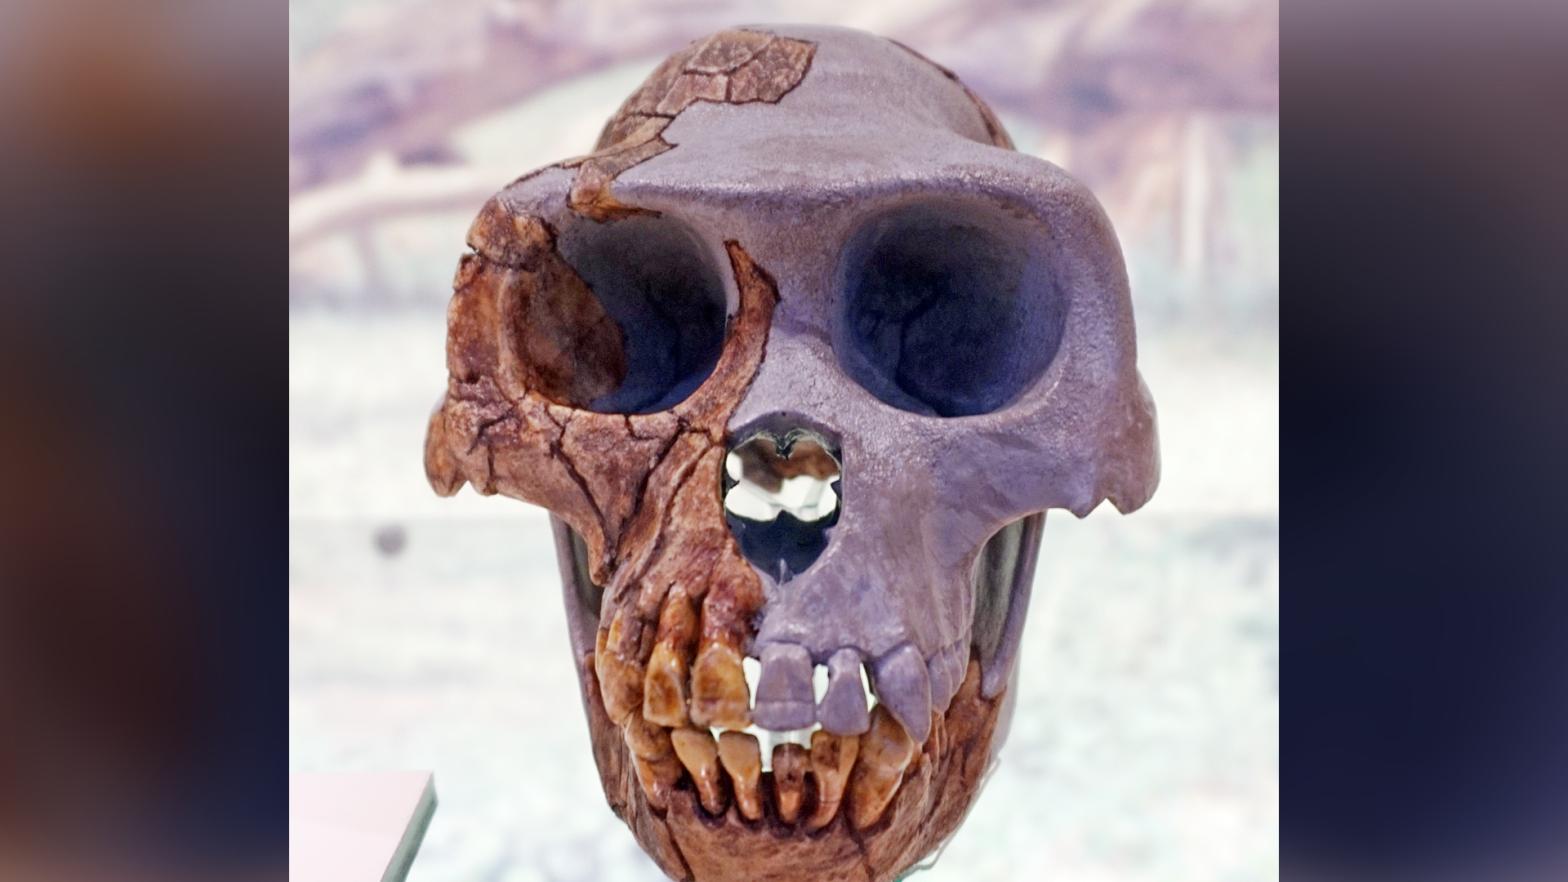 Ardipithecus ramidus skull in National Museum of Natural Sciences of Spain. (Photo: Tiia Monto)